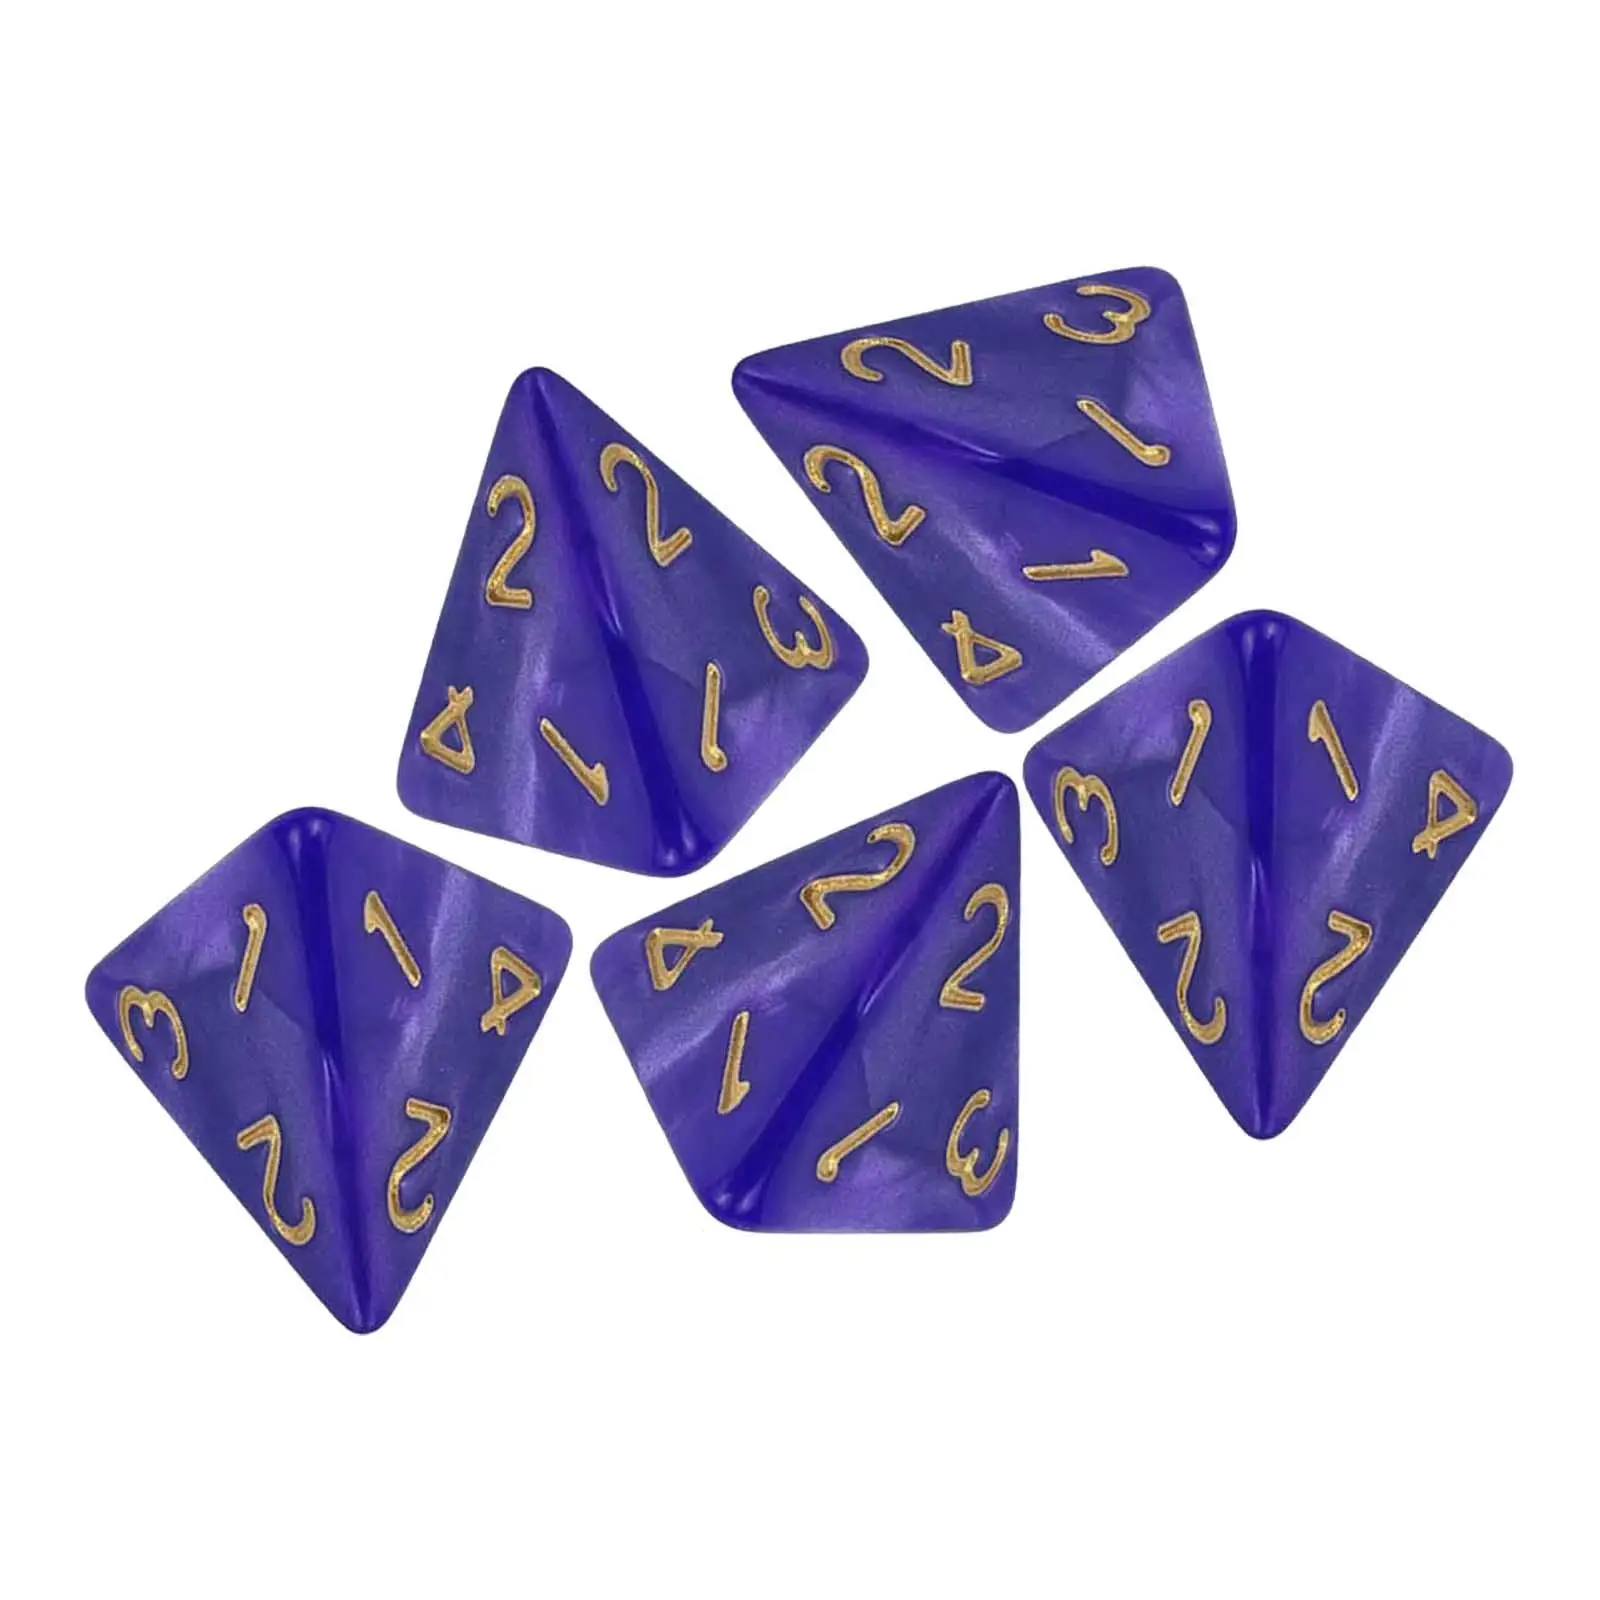 5 pieces Polyhedral Dices Multi Sided Game Dices for Party KTV Table Game